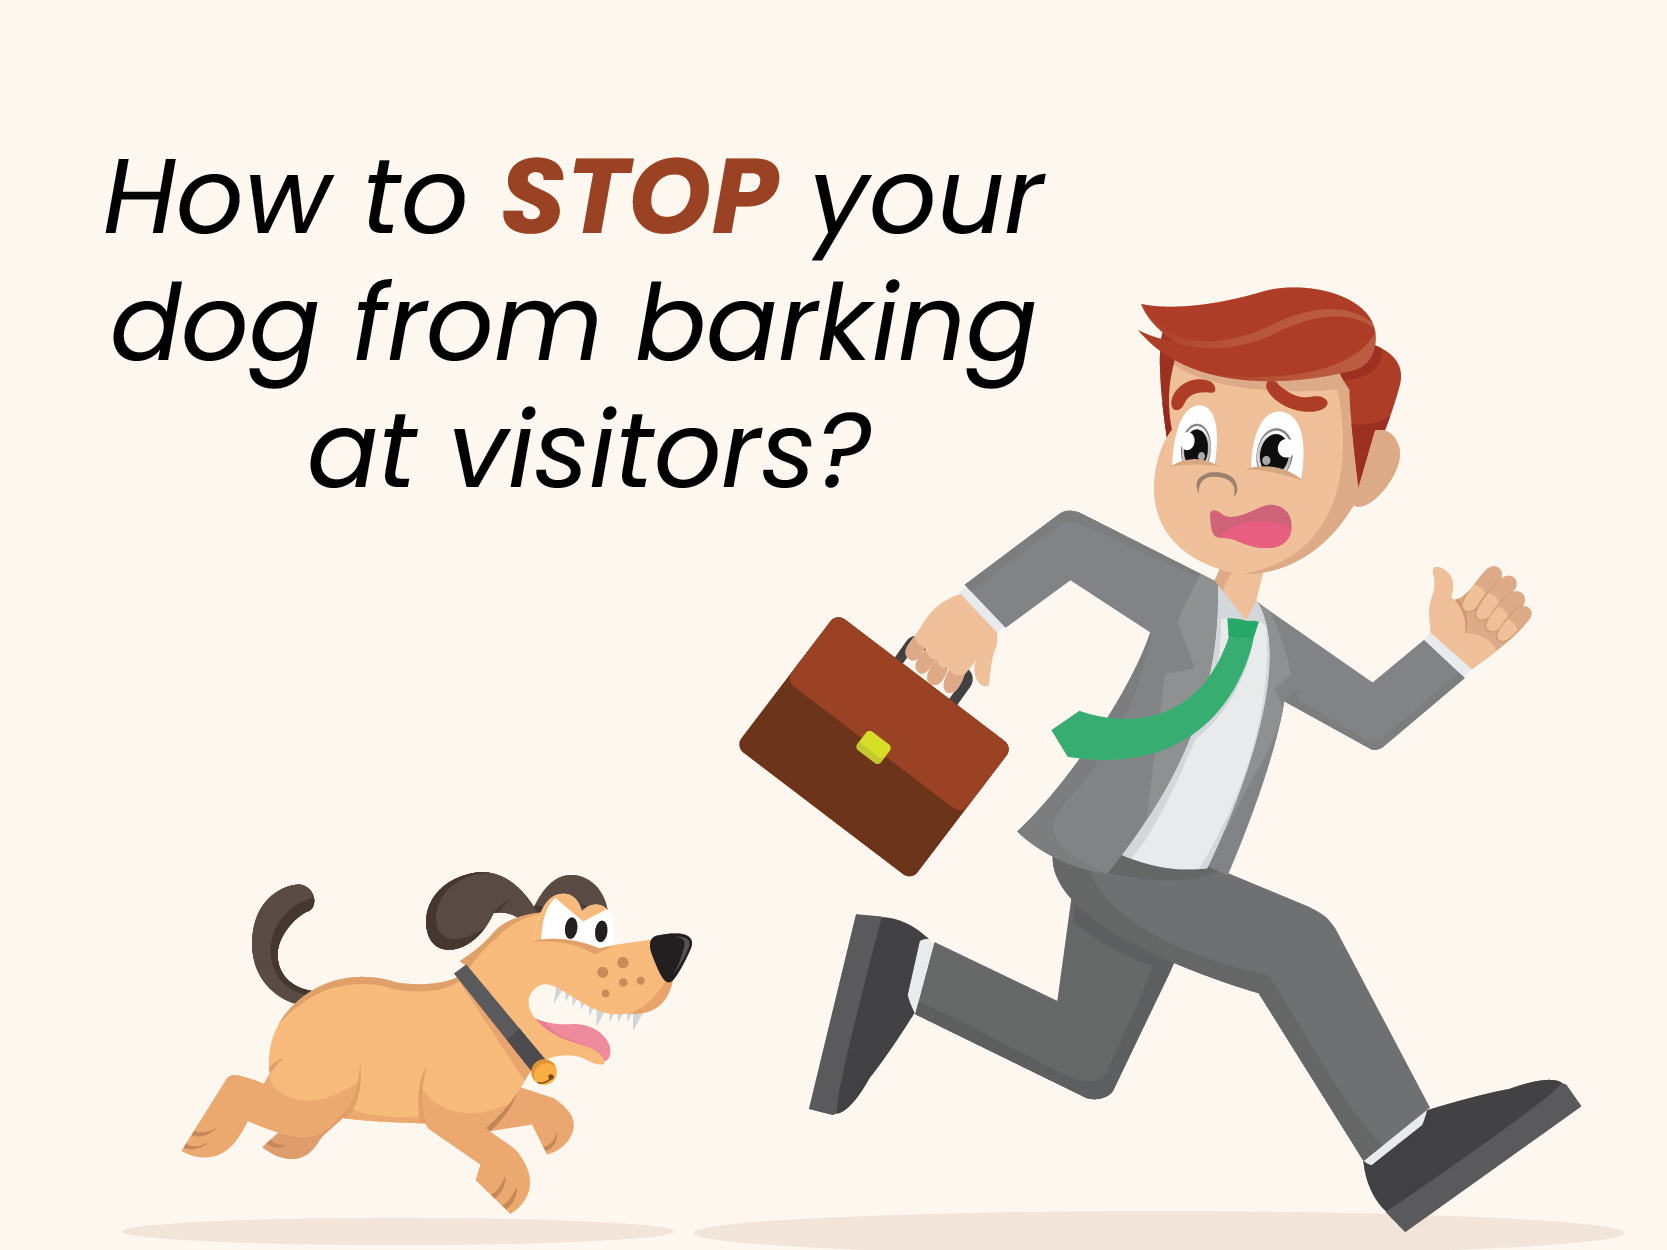 How-to-stop-dog-barking-at-visitors